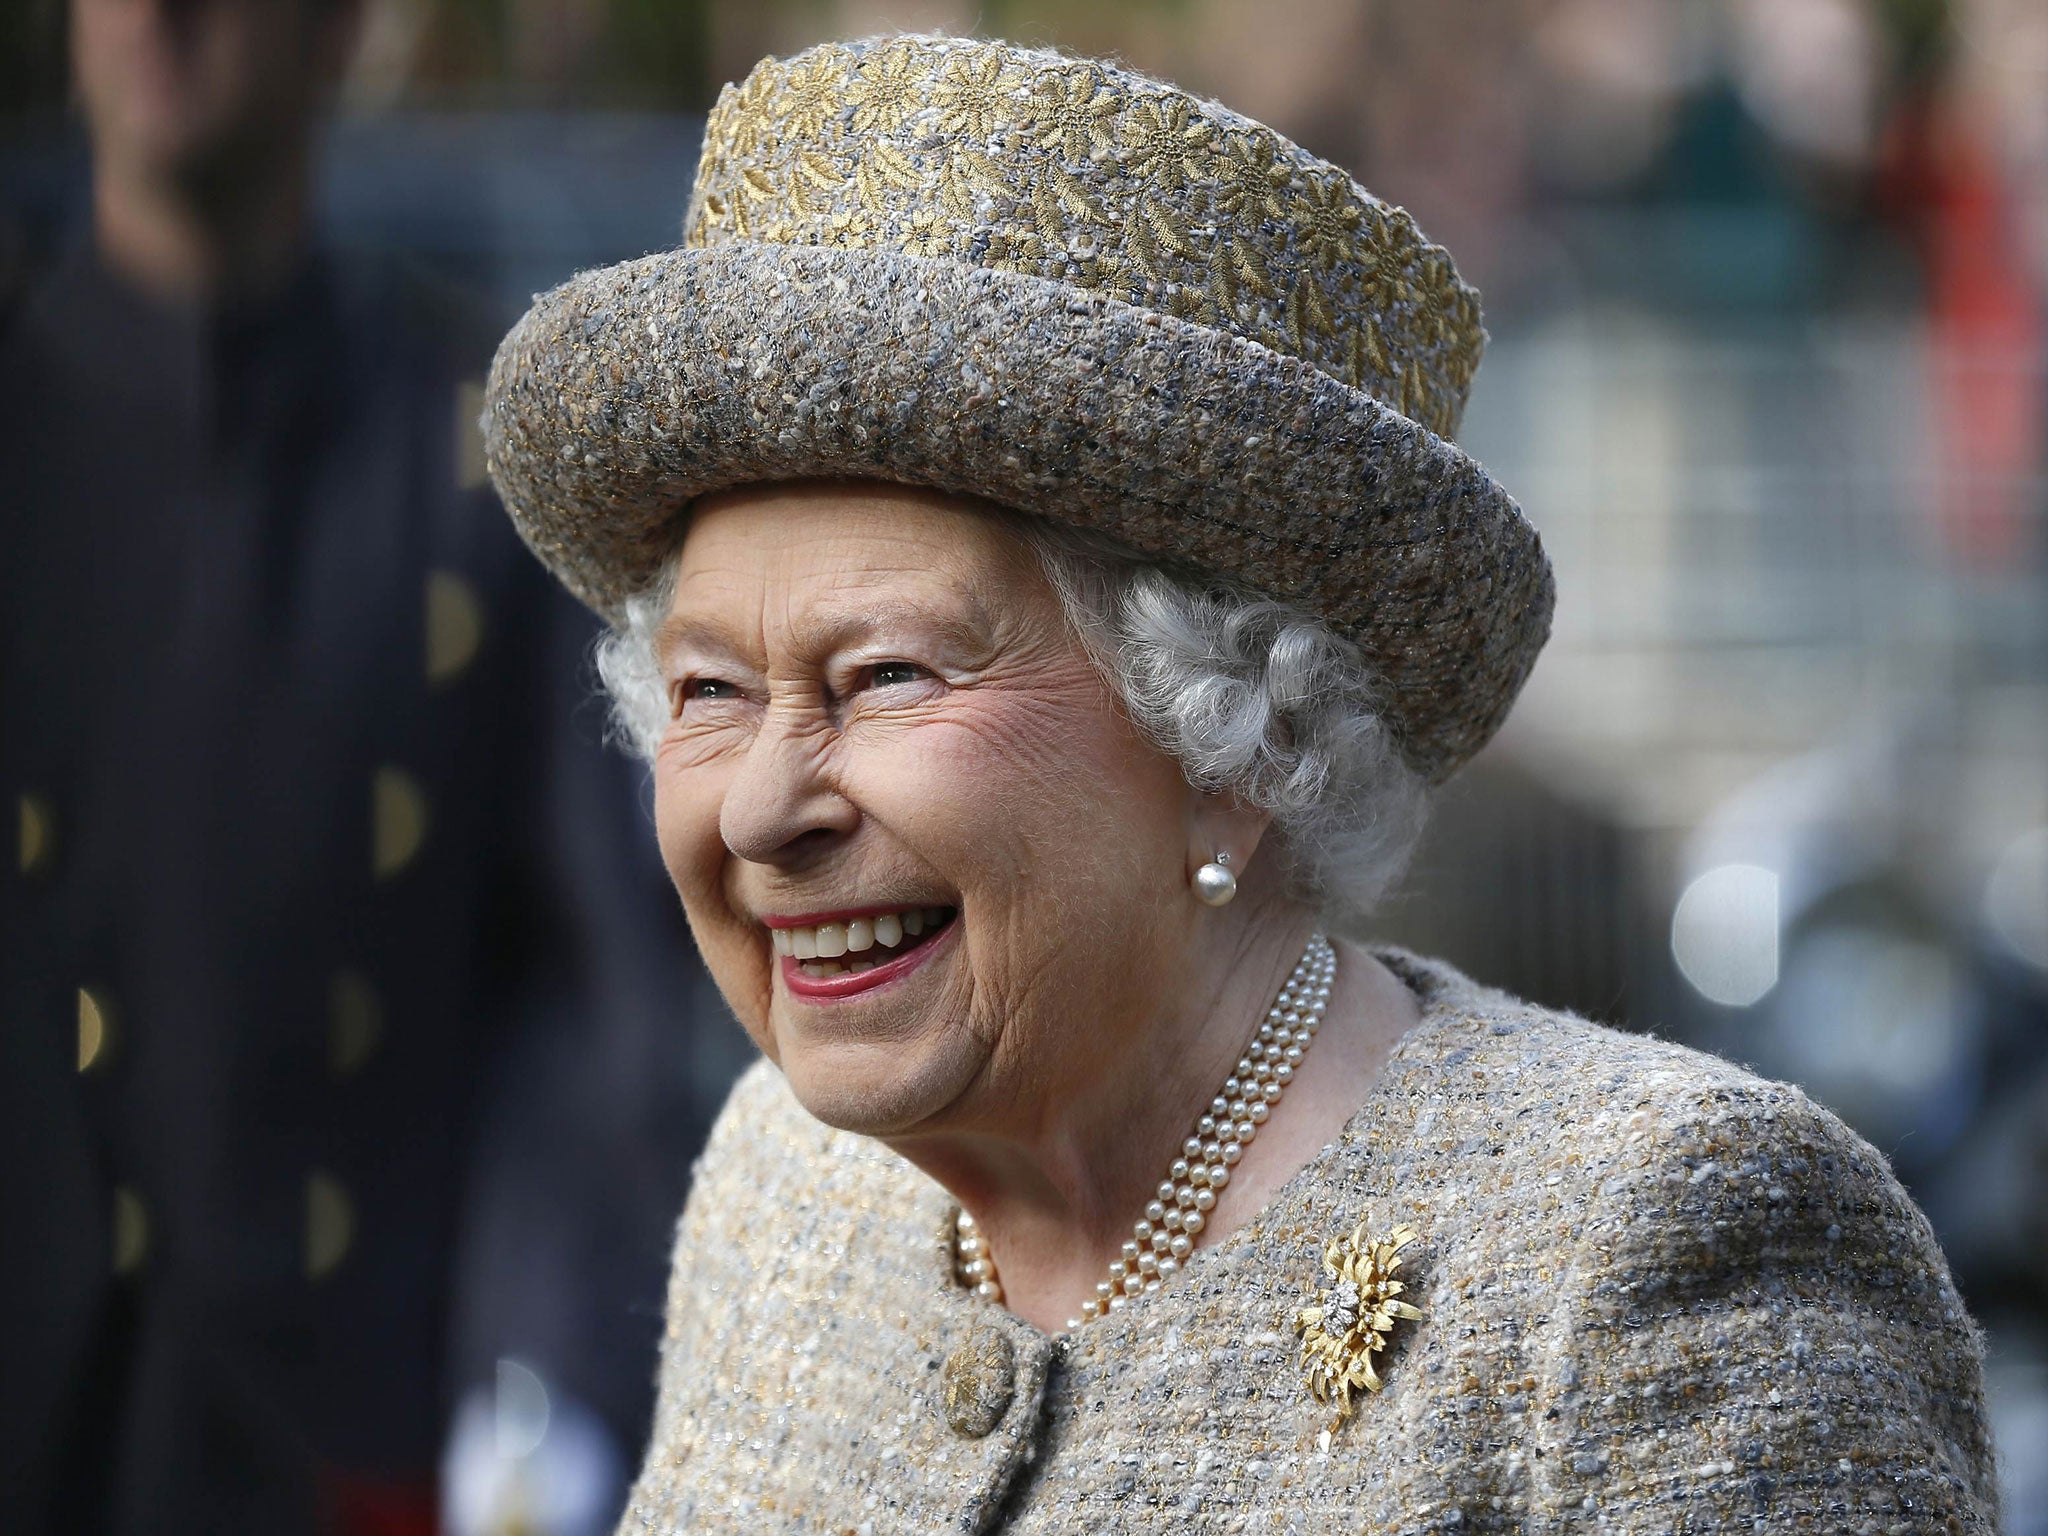 The Queen is not ill, Buckingham Palace says